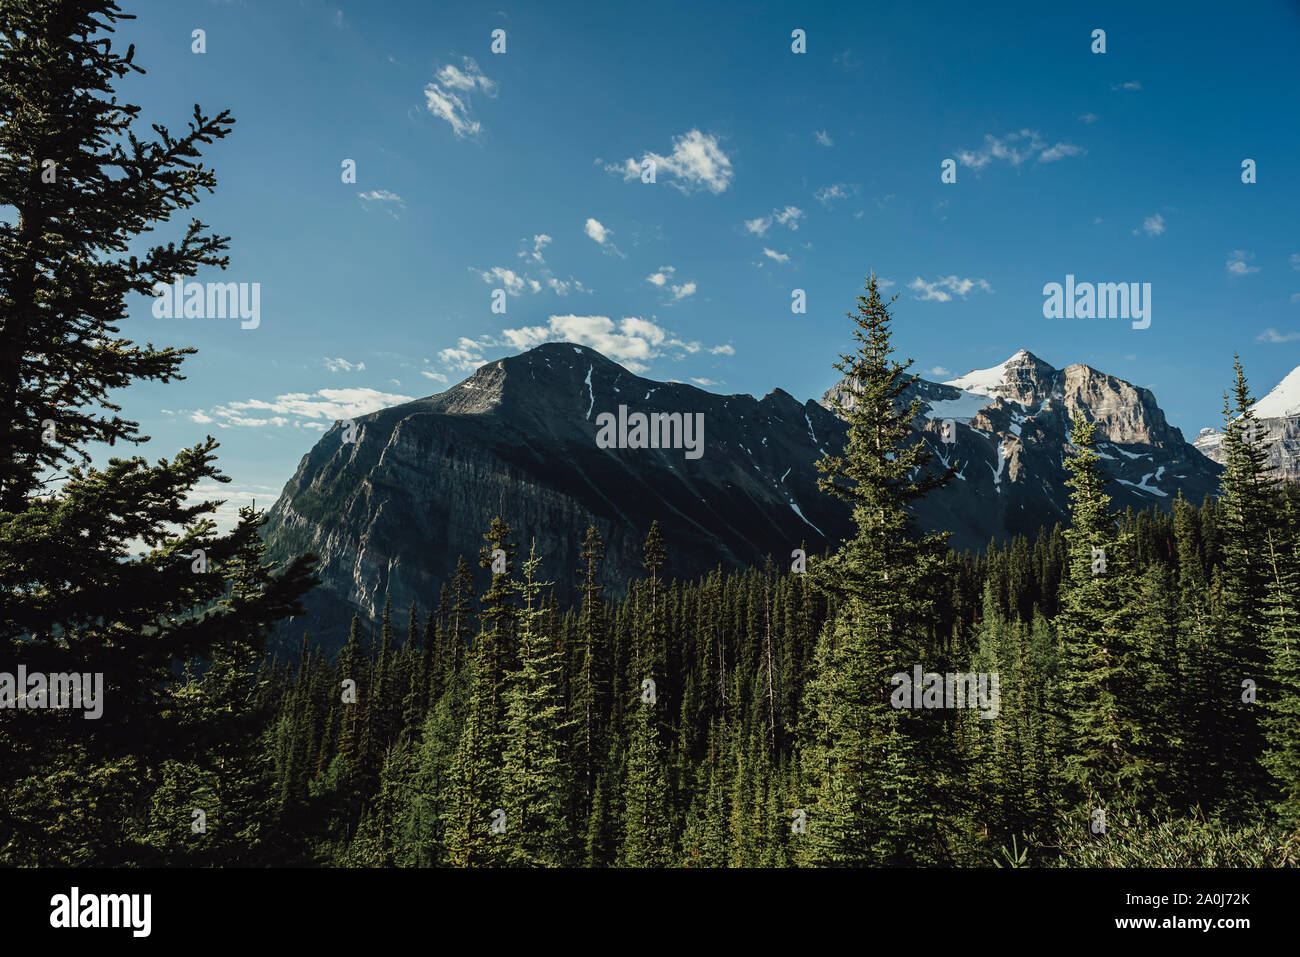 View of mountains and forest from hiking path through the Rockies. Stock Photo